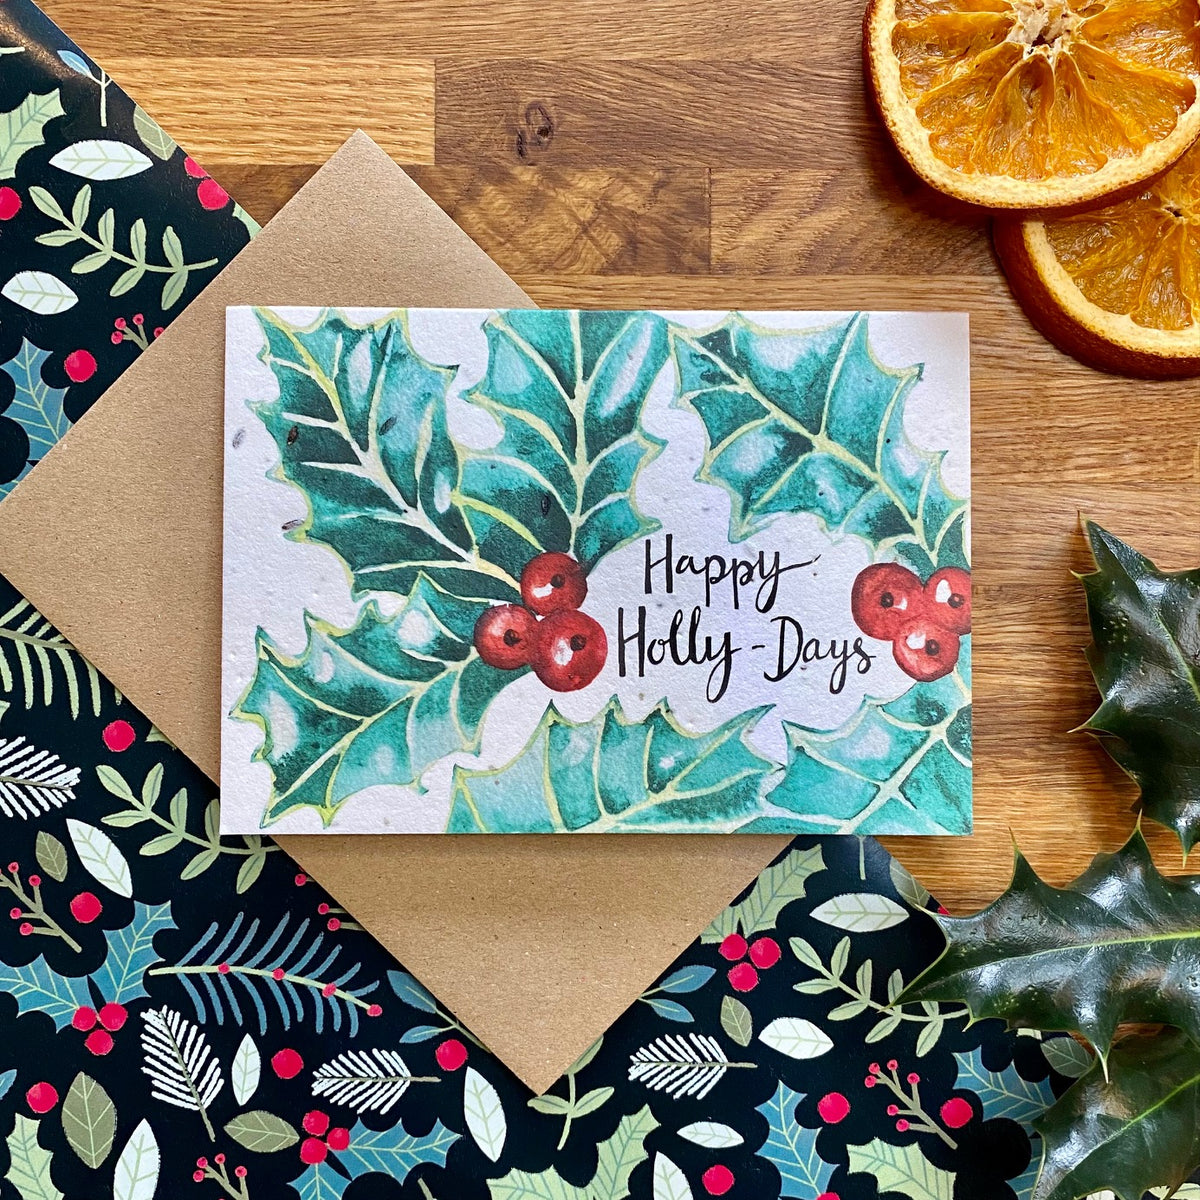 Happy Holly-Days - Plantable Wildflower Christmas Card | Greetings Card - The Naughty Shrew